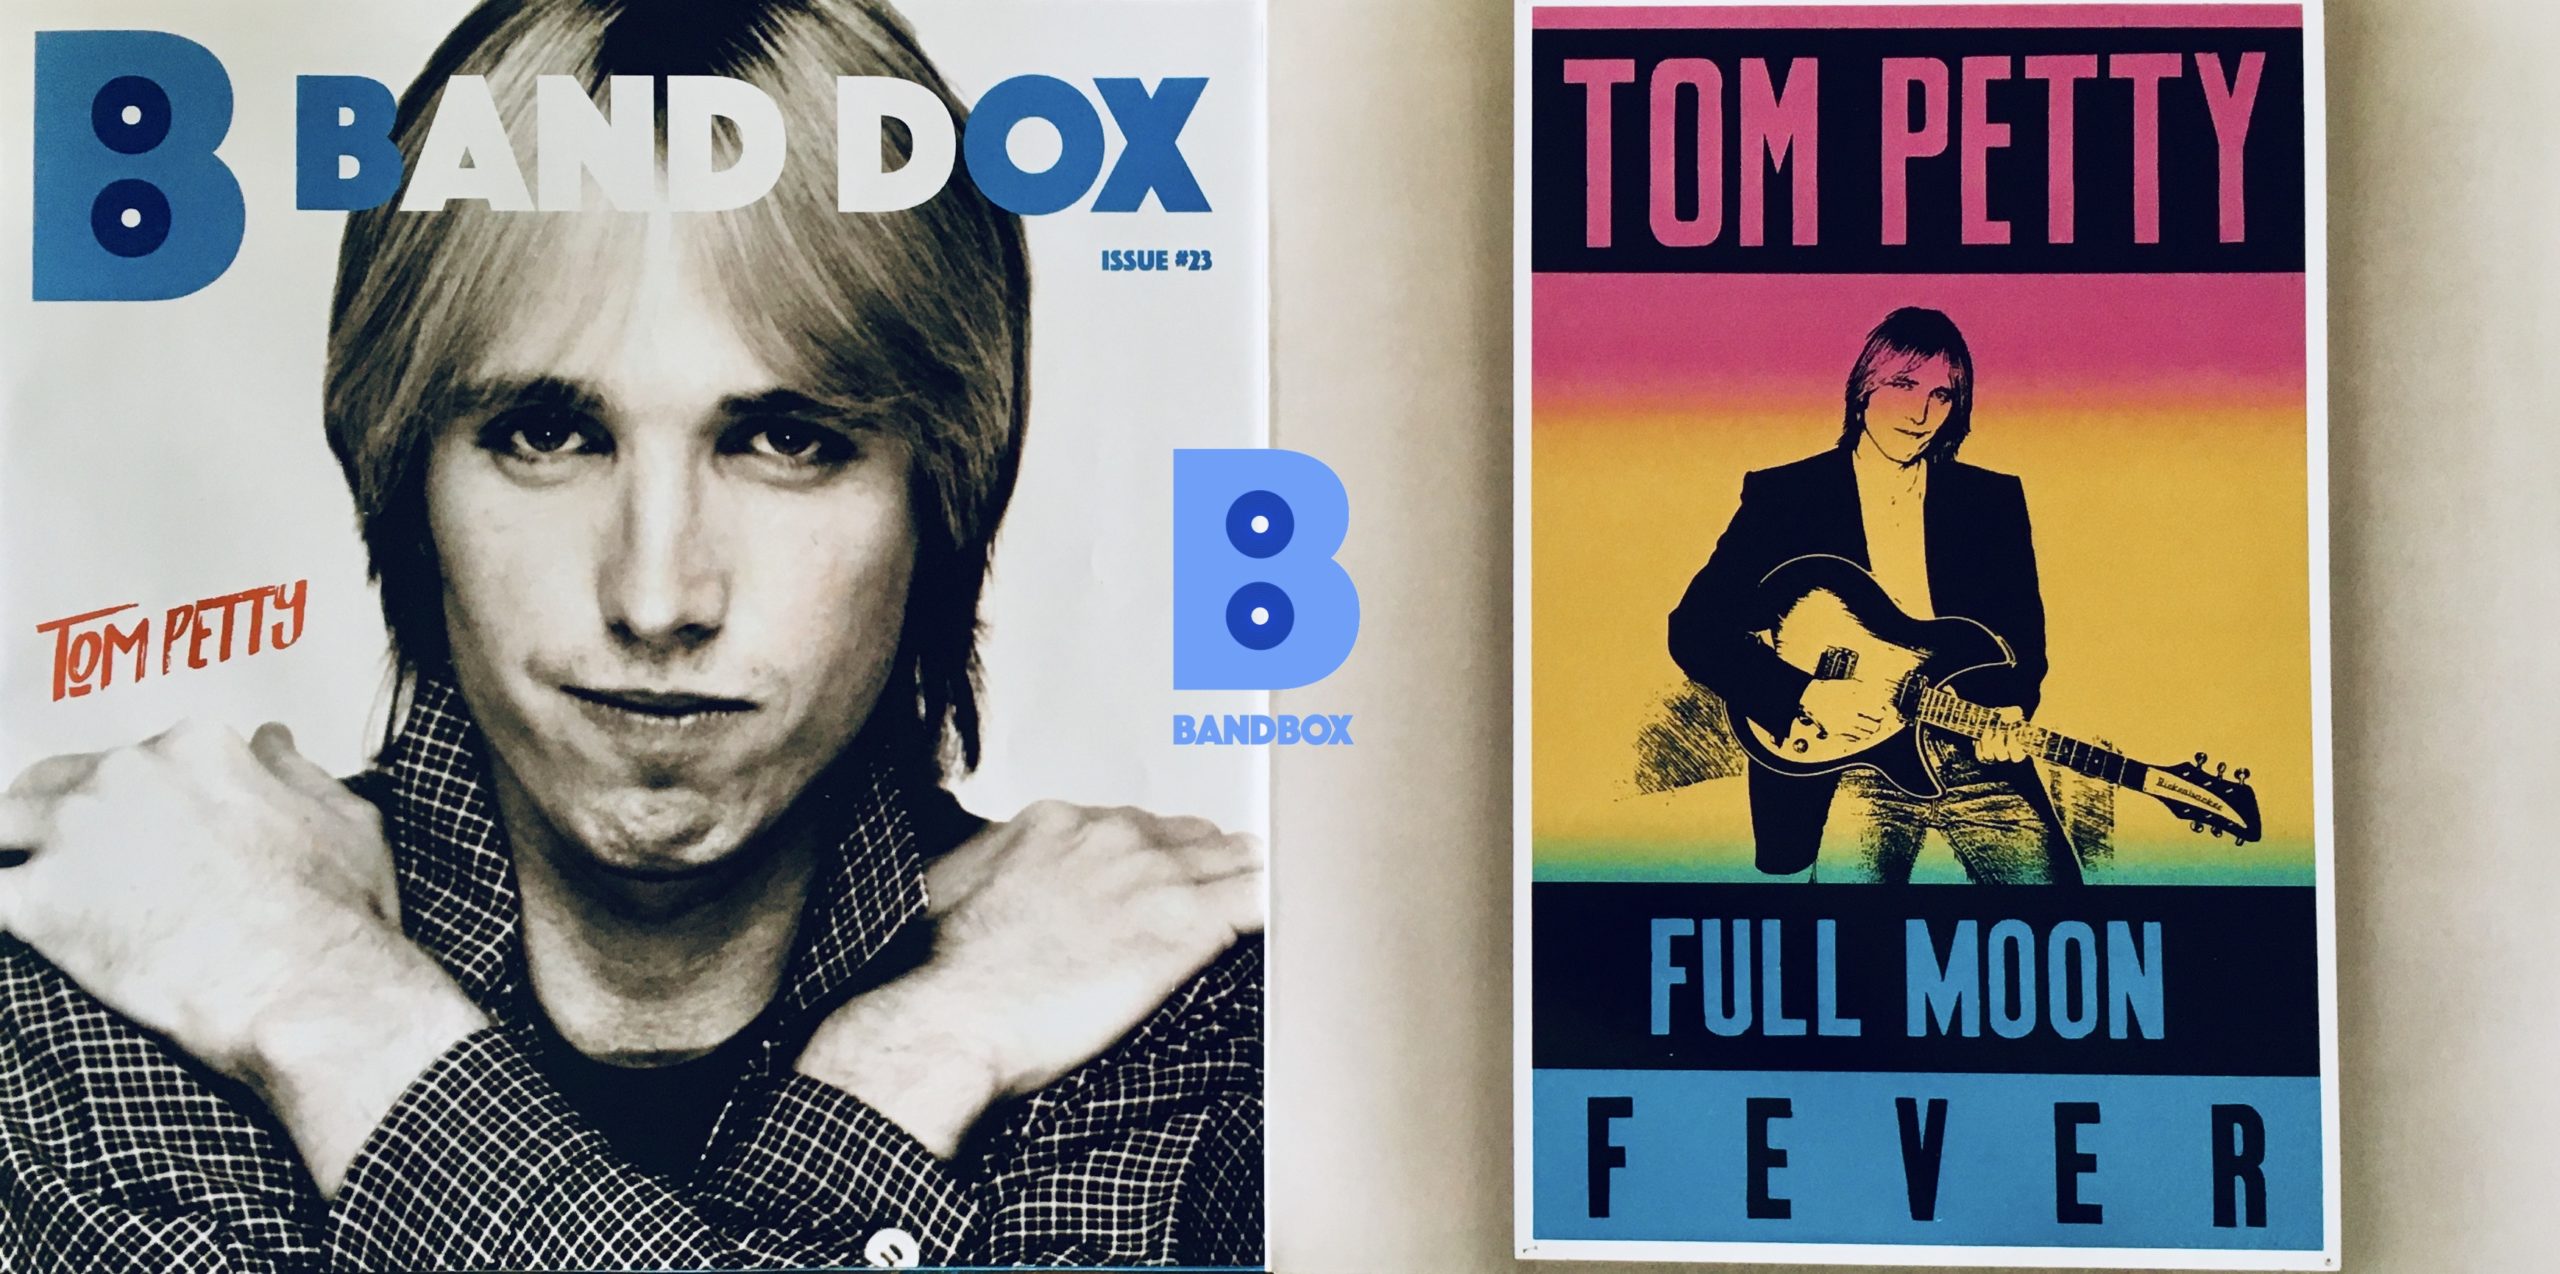 Geek insider, geekinsider, geekinsider. Com,, bandbox unboxed vol. 15 - tom petty, entertainment